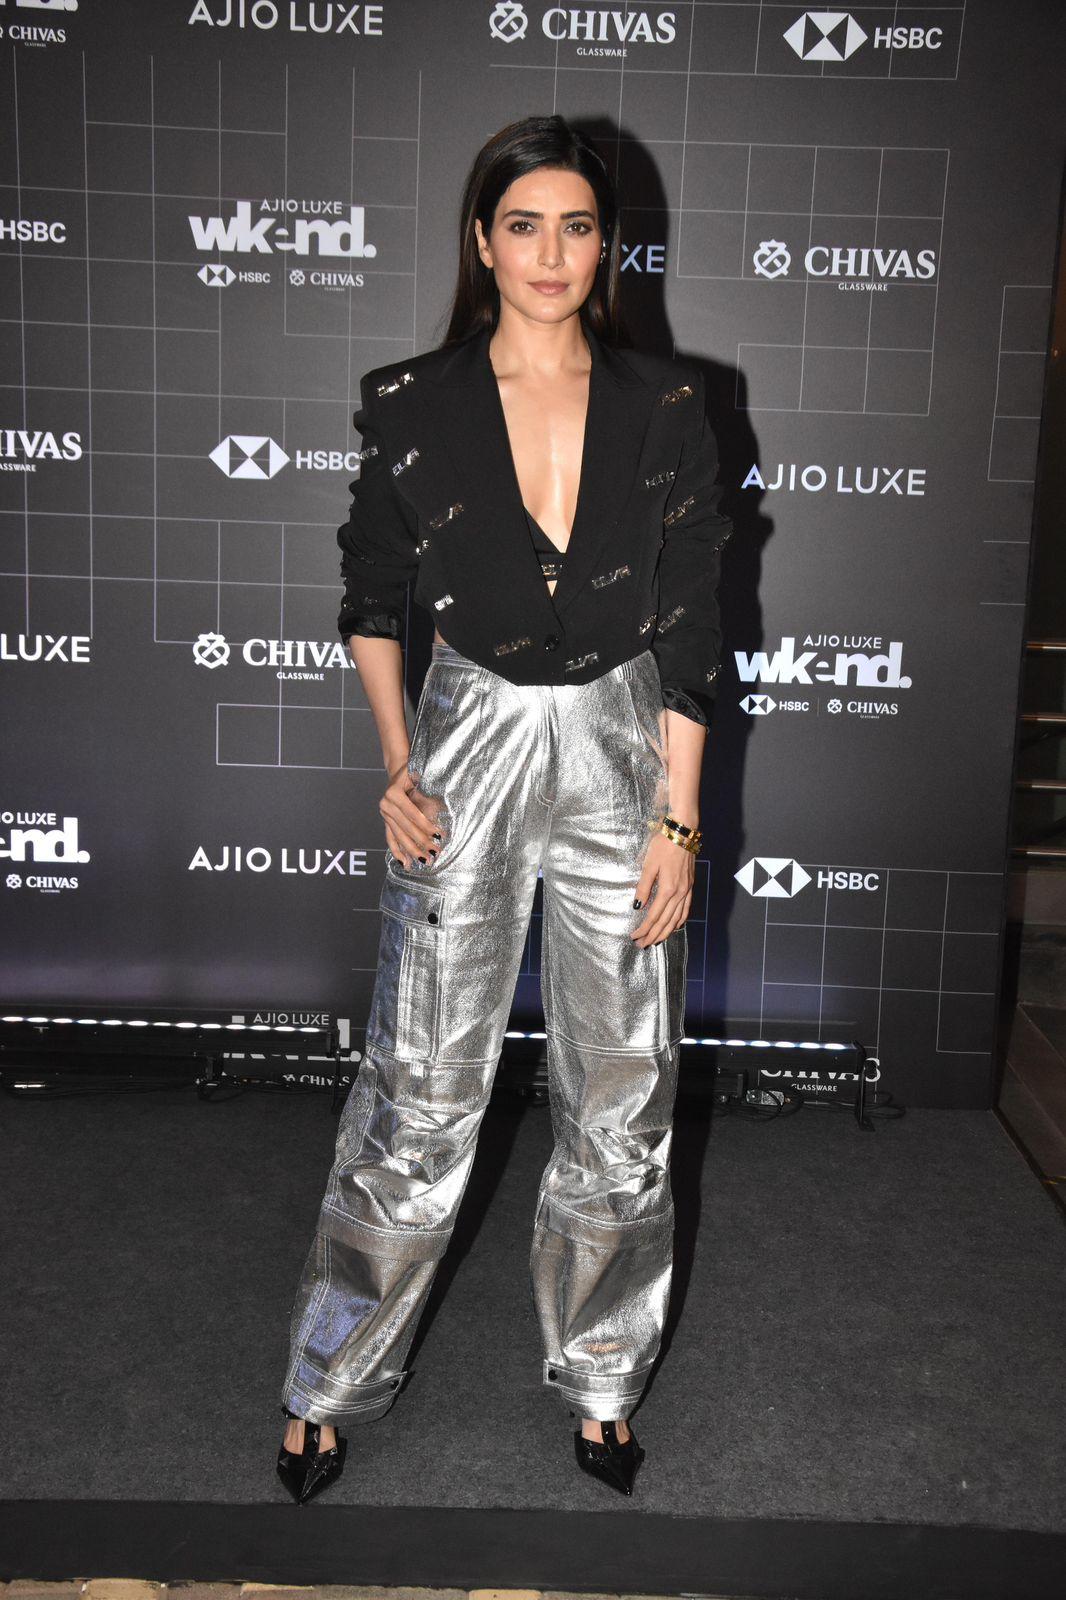 Karishma Tanna is always sure to serve looks and she did not disappoint last night, Karishma Tanna paired metallic pants with a black top which featured a dramatic sleeve